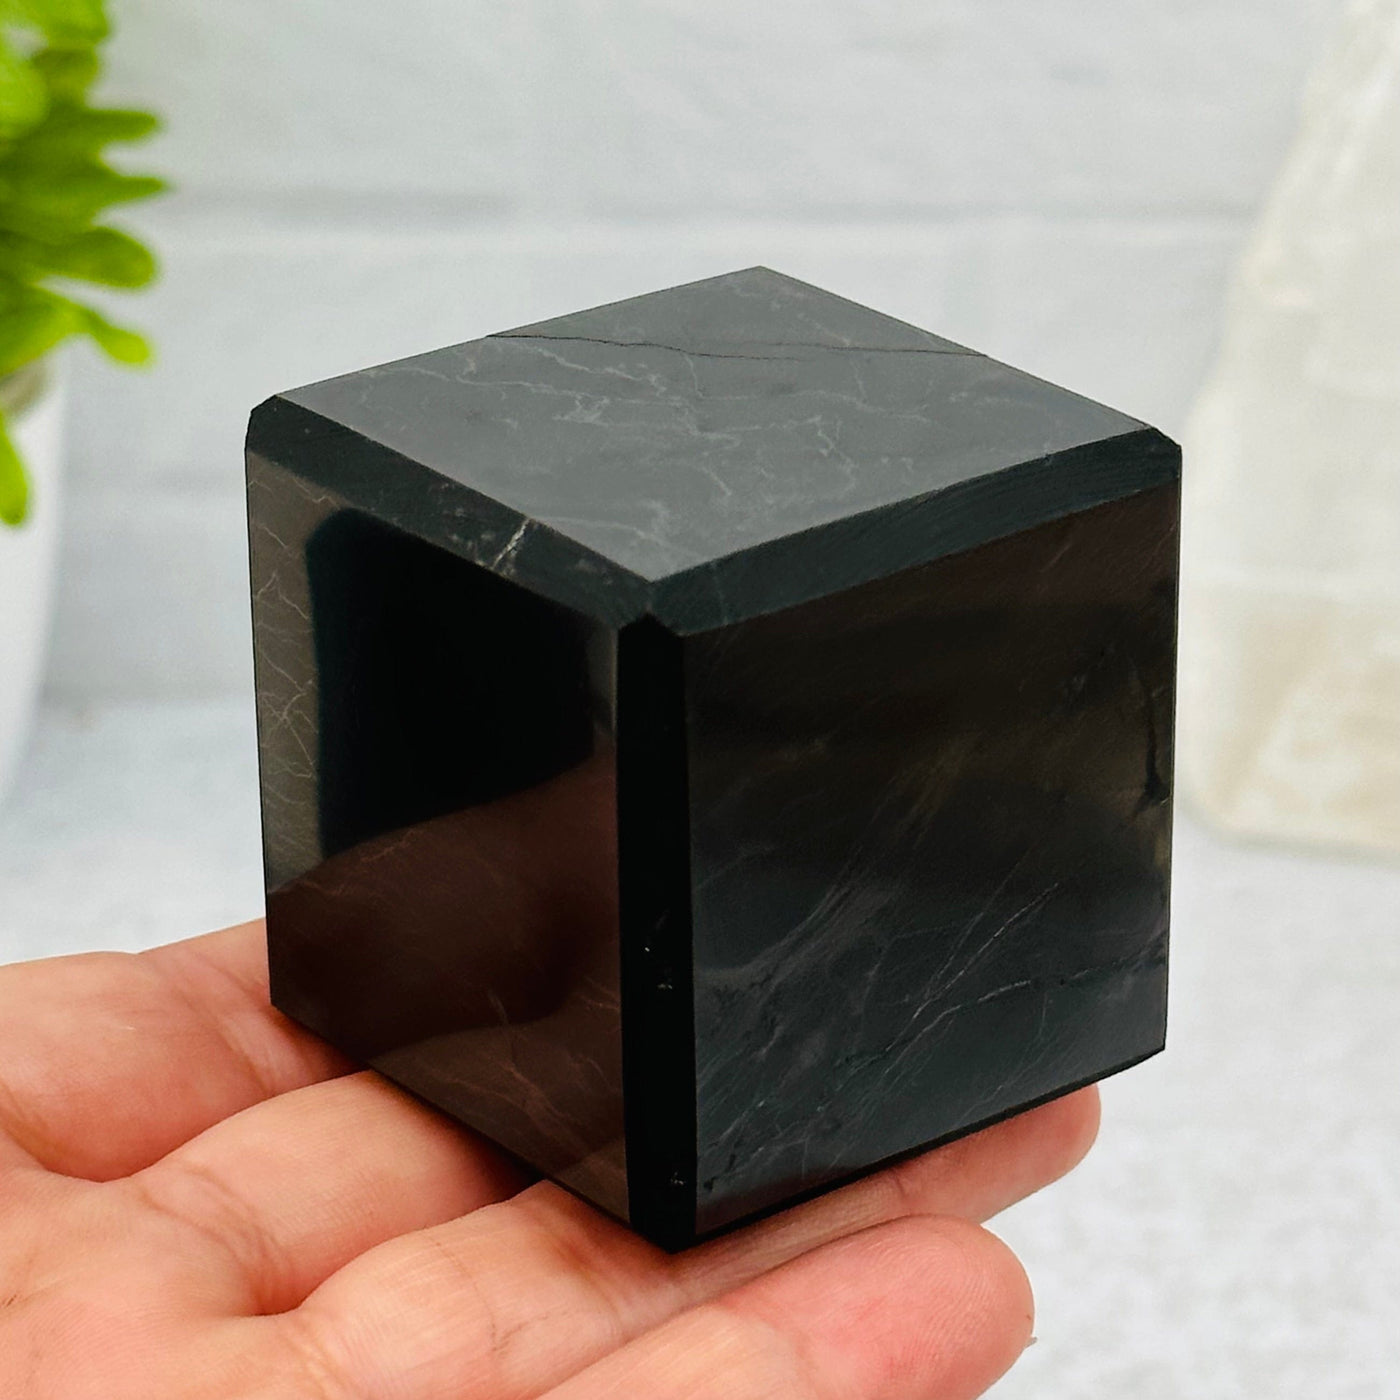 4cm shungite cube in hand for size reference 